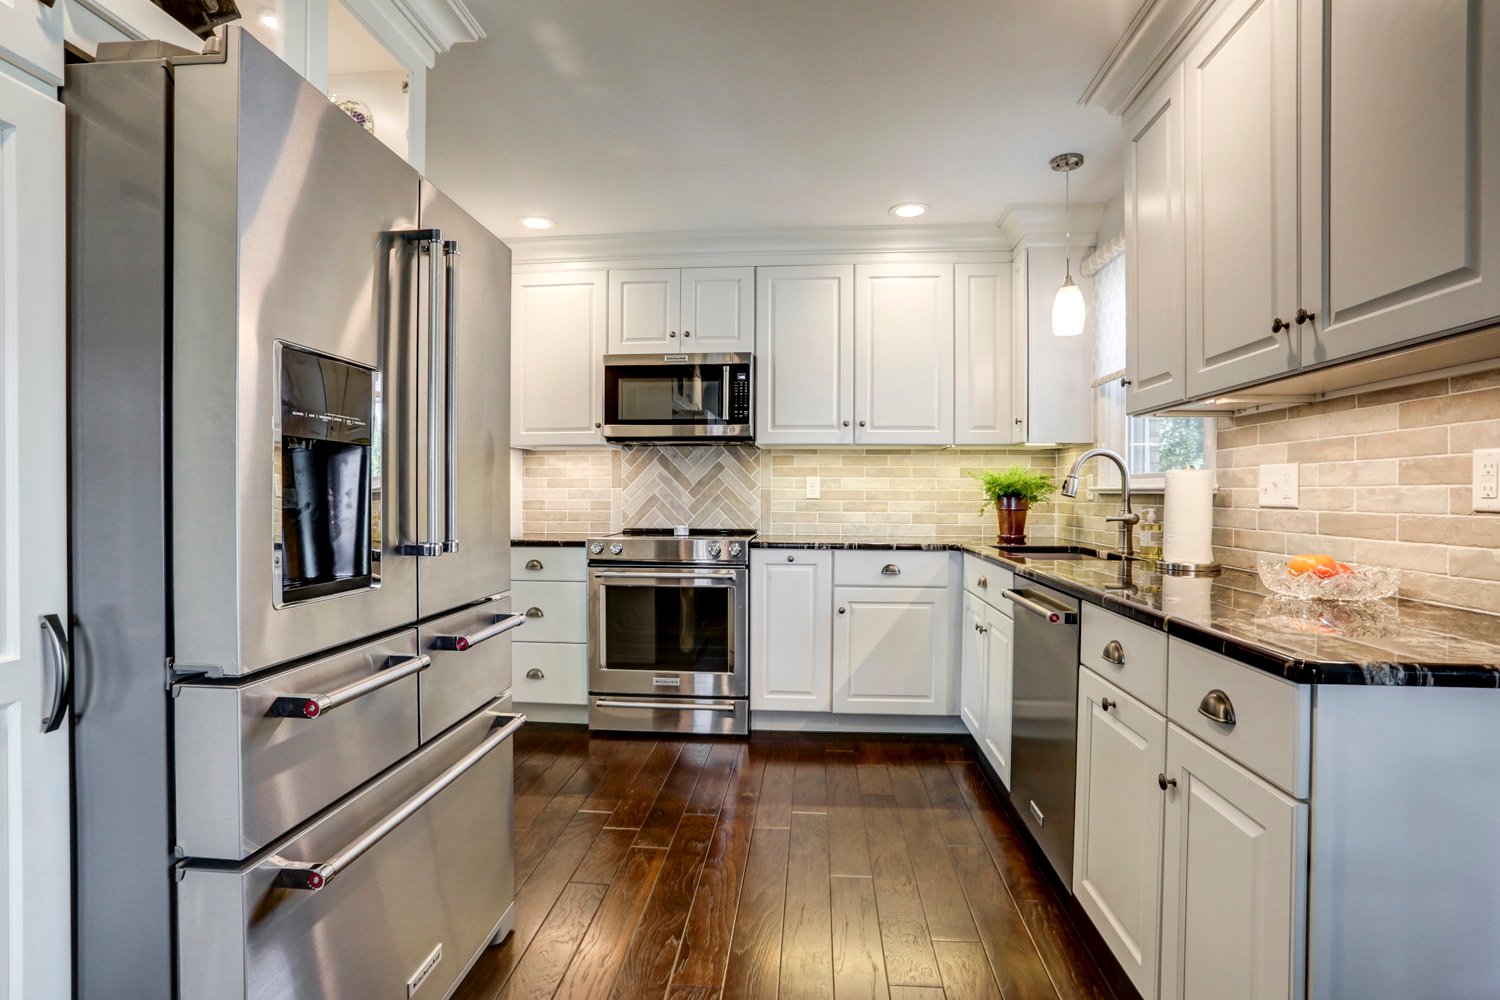 Manheim Township Kitchen Remodel with hardwood and stainless steal appliances